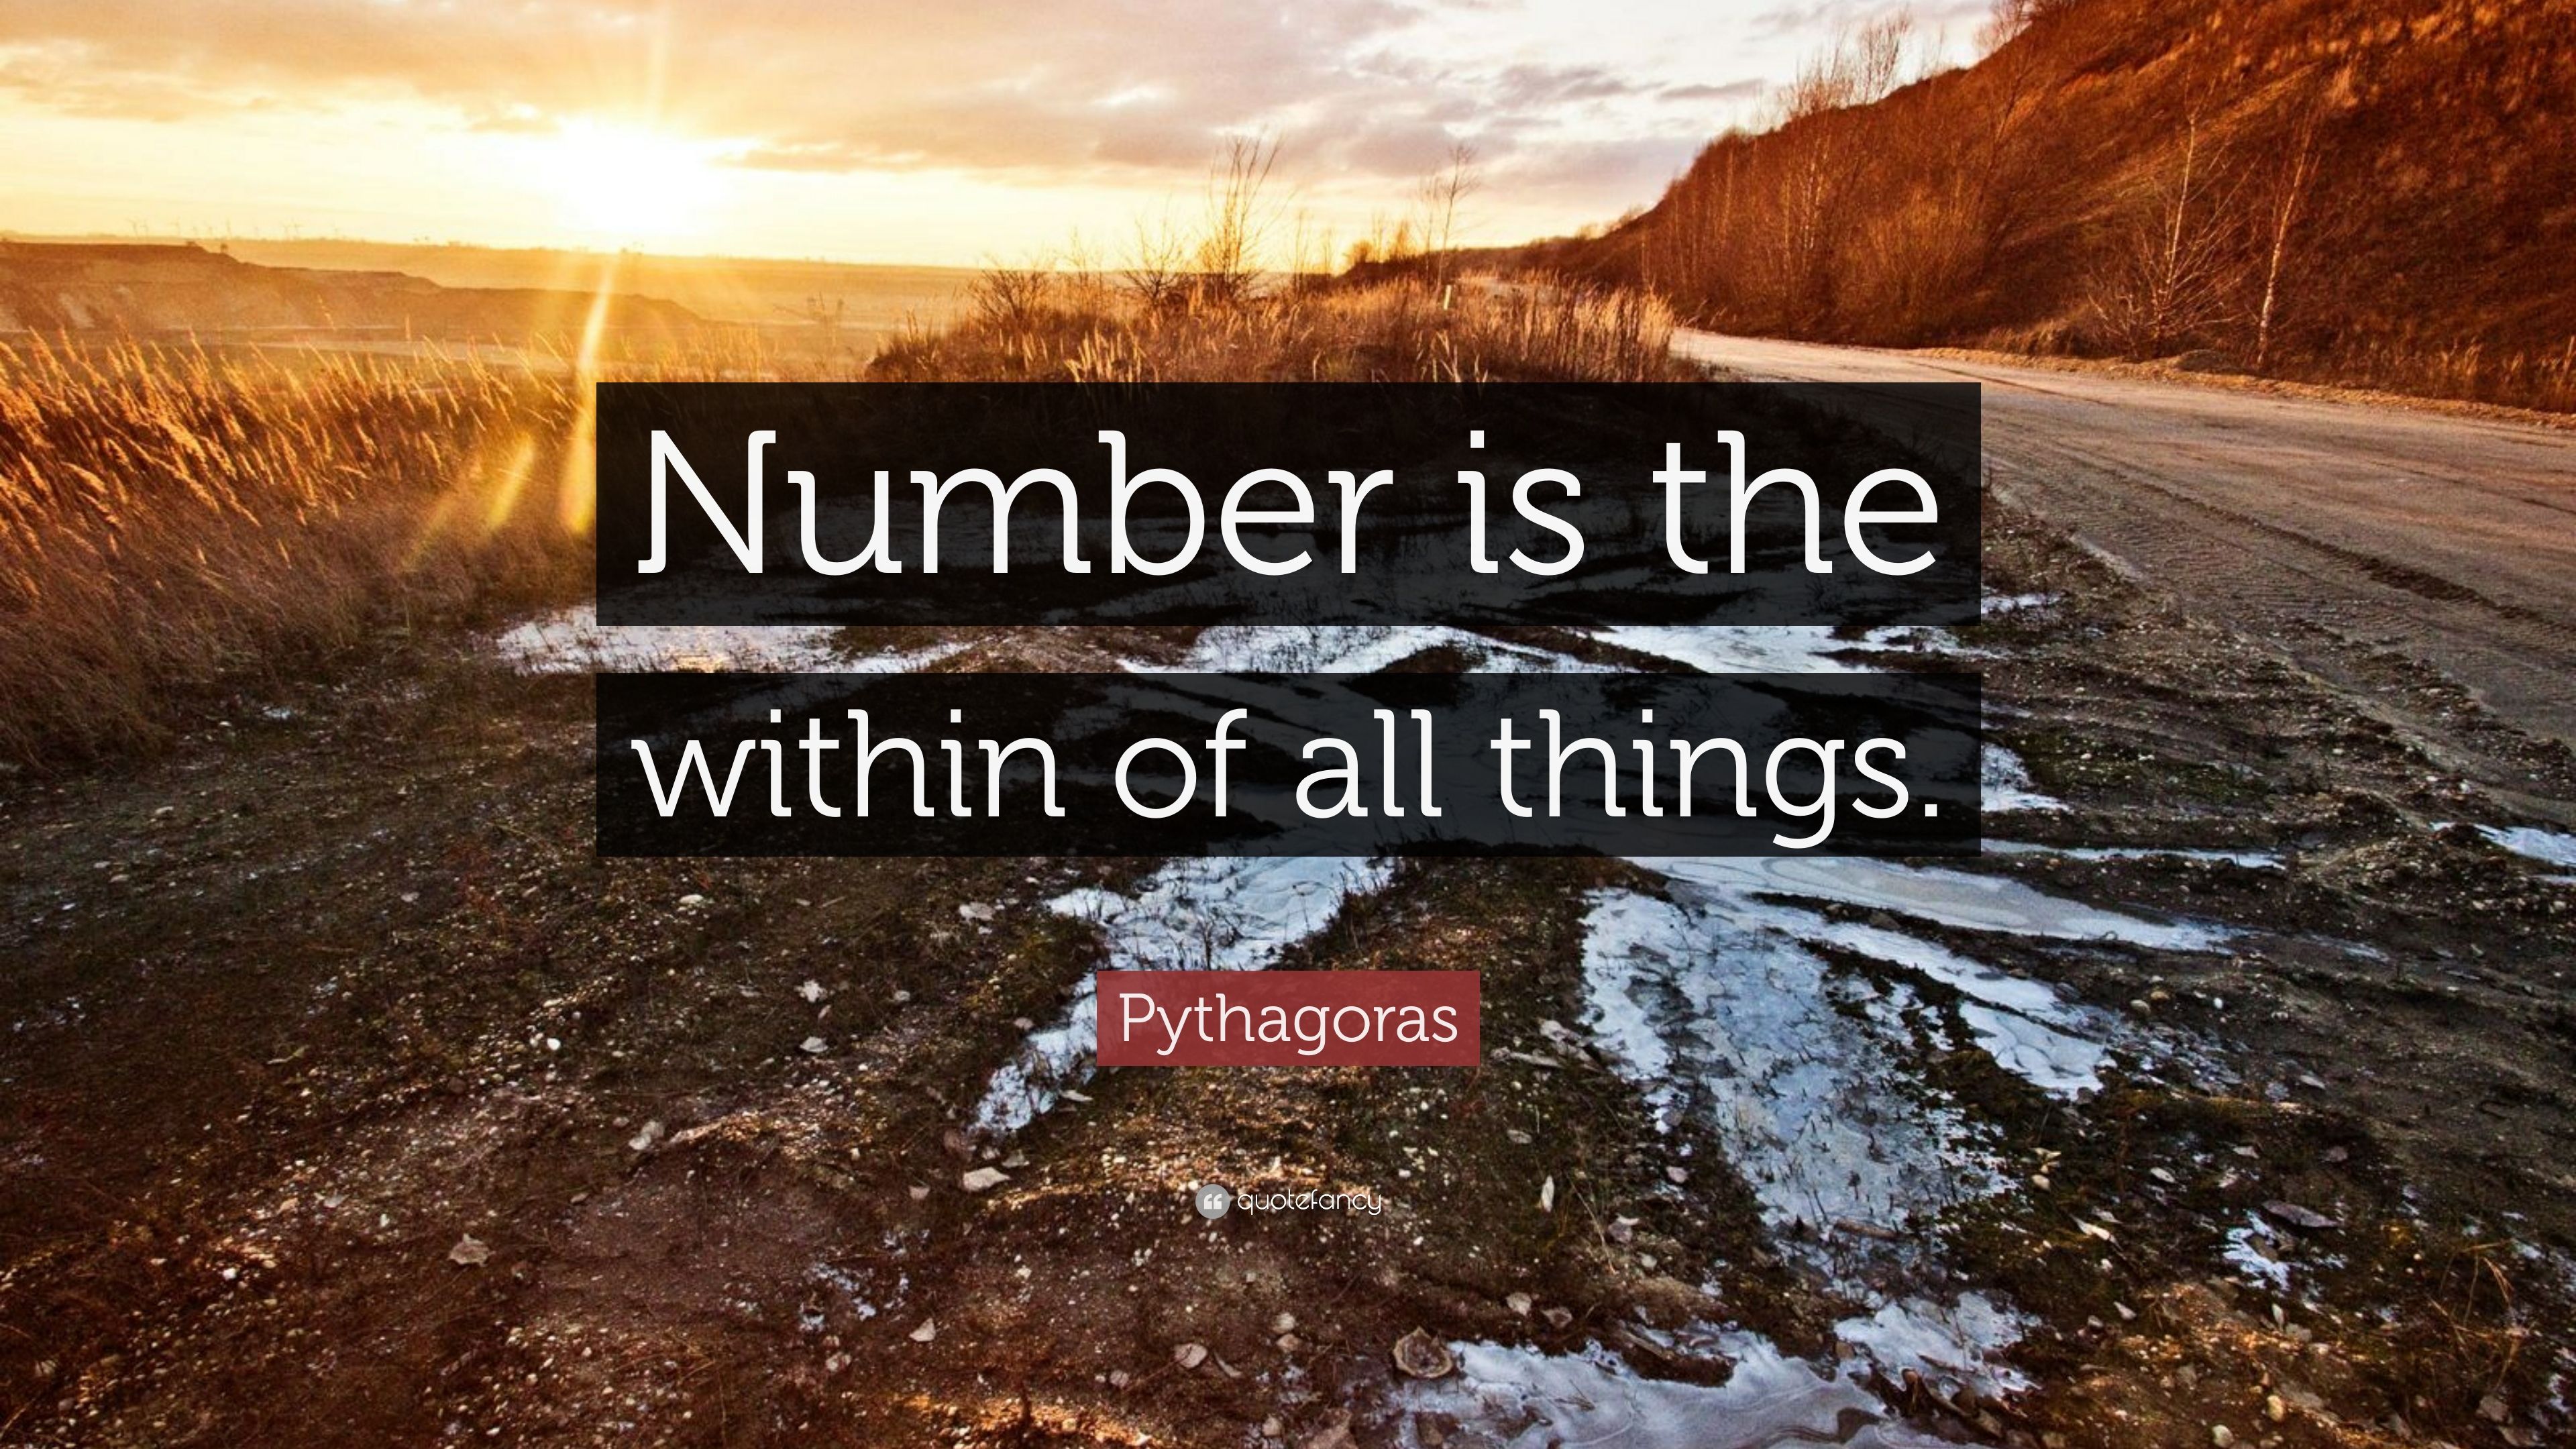 Pythagoras Quote: “Number is the within of all things.” 7